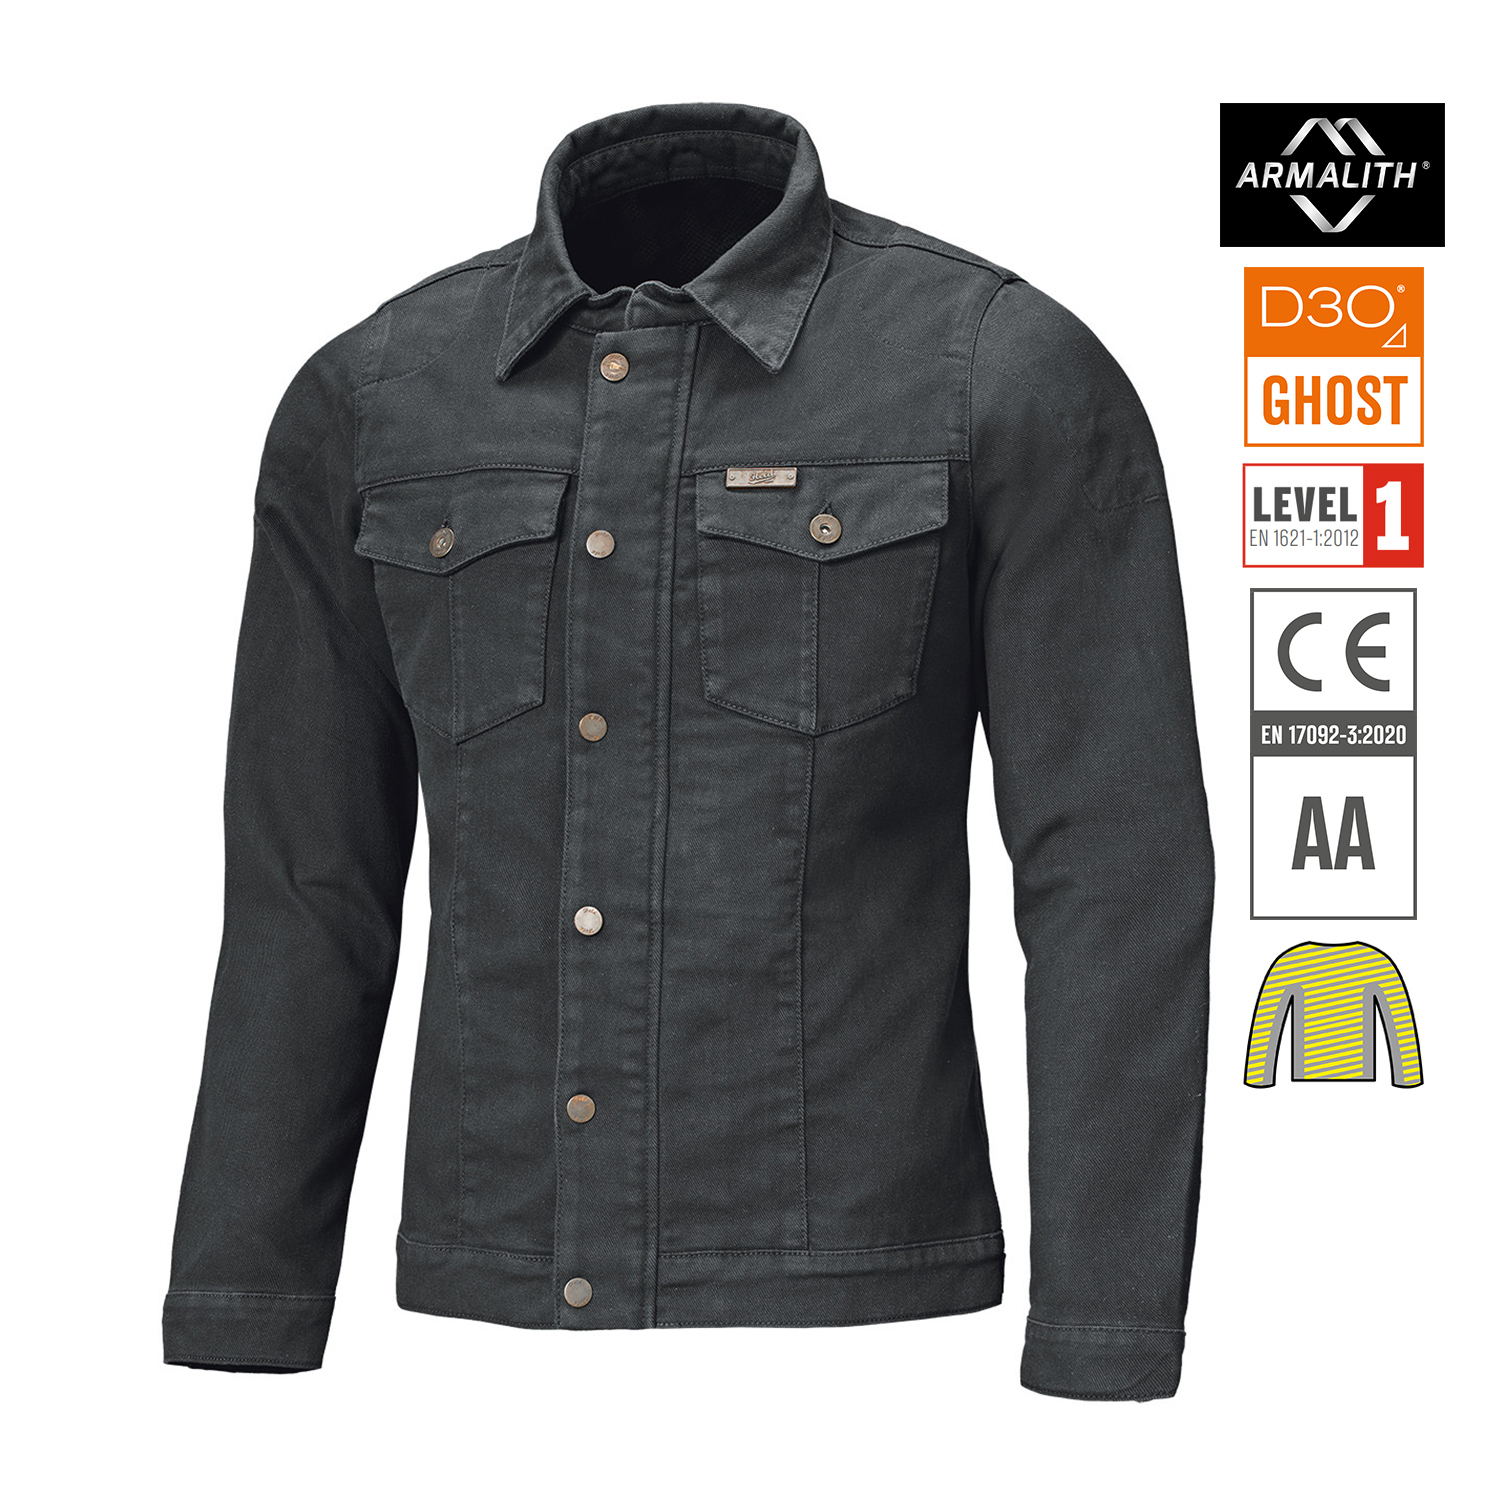 Held Woodland Armalith Jacket Black - Available in Various Sizes